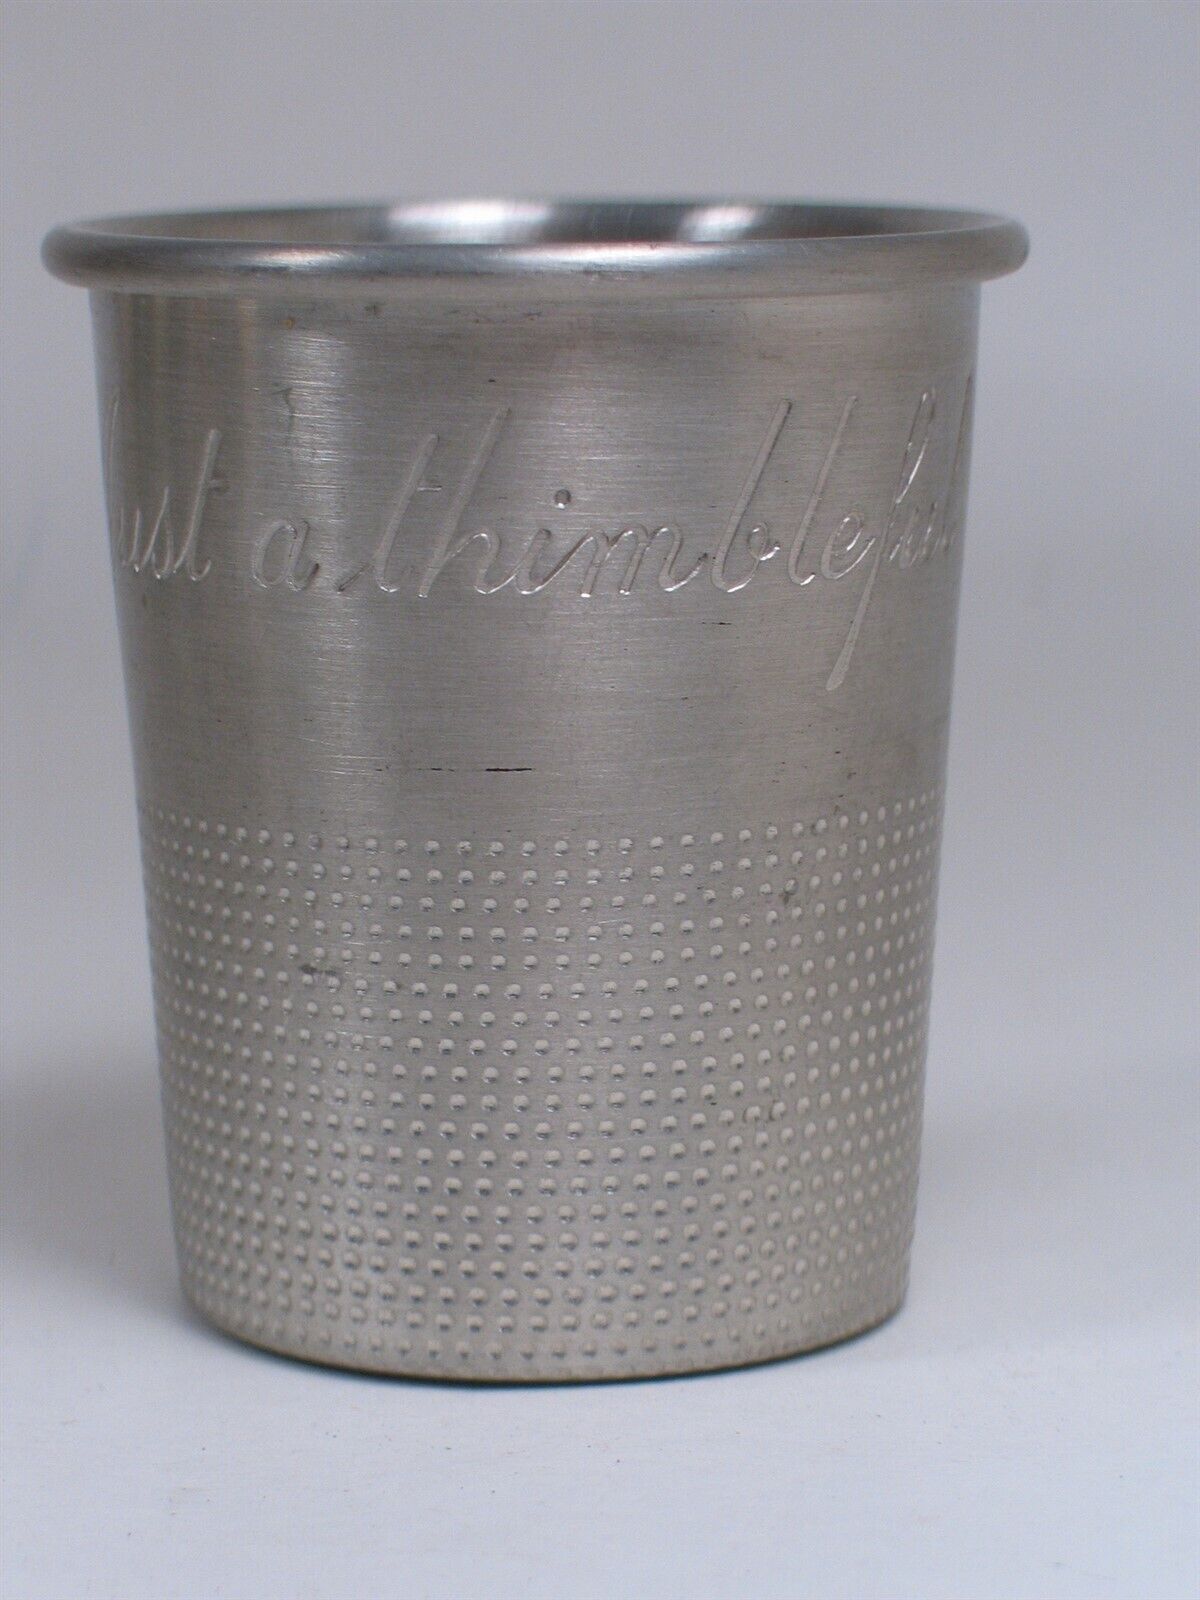 Poole JUST A THIMBLEFUL Pewter SHOT GLASS, 2206. Very clean original condition